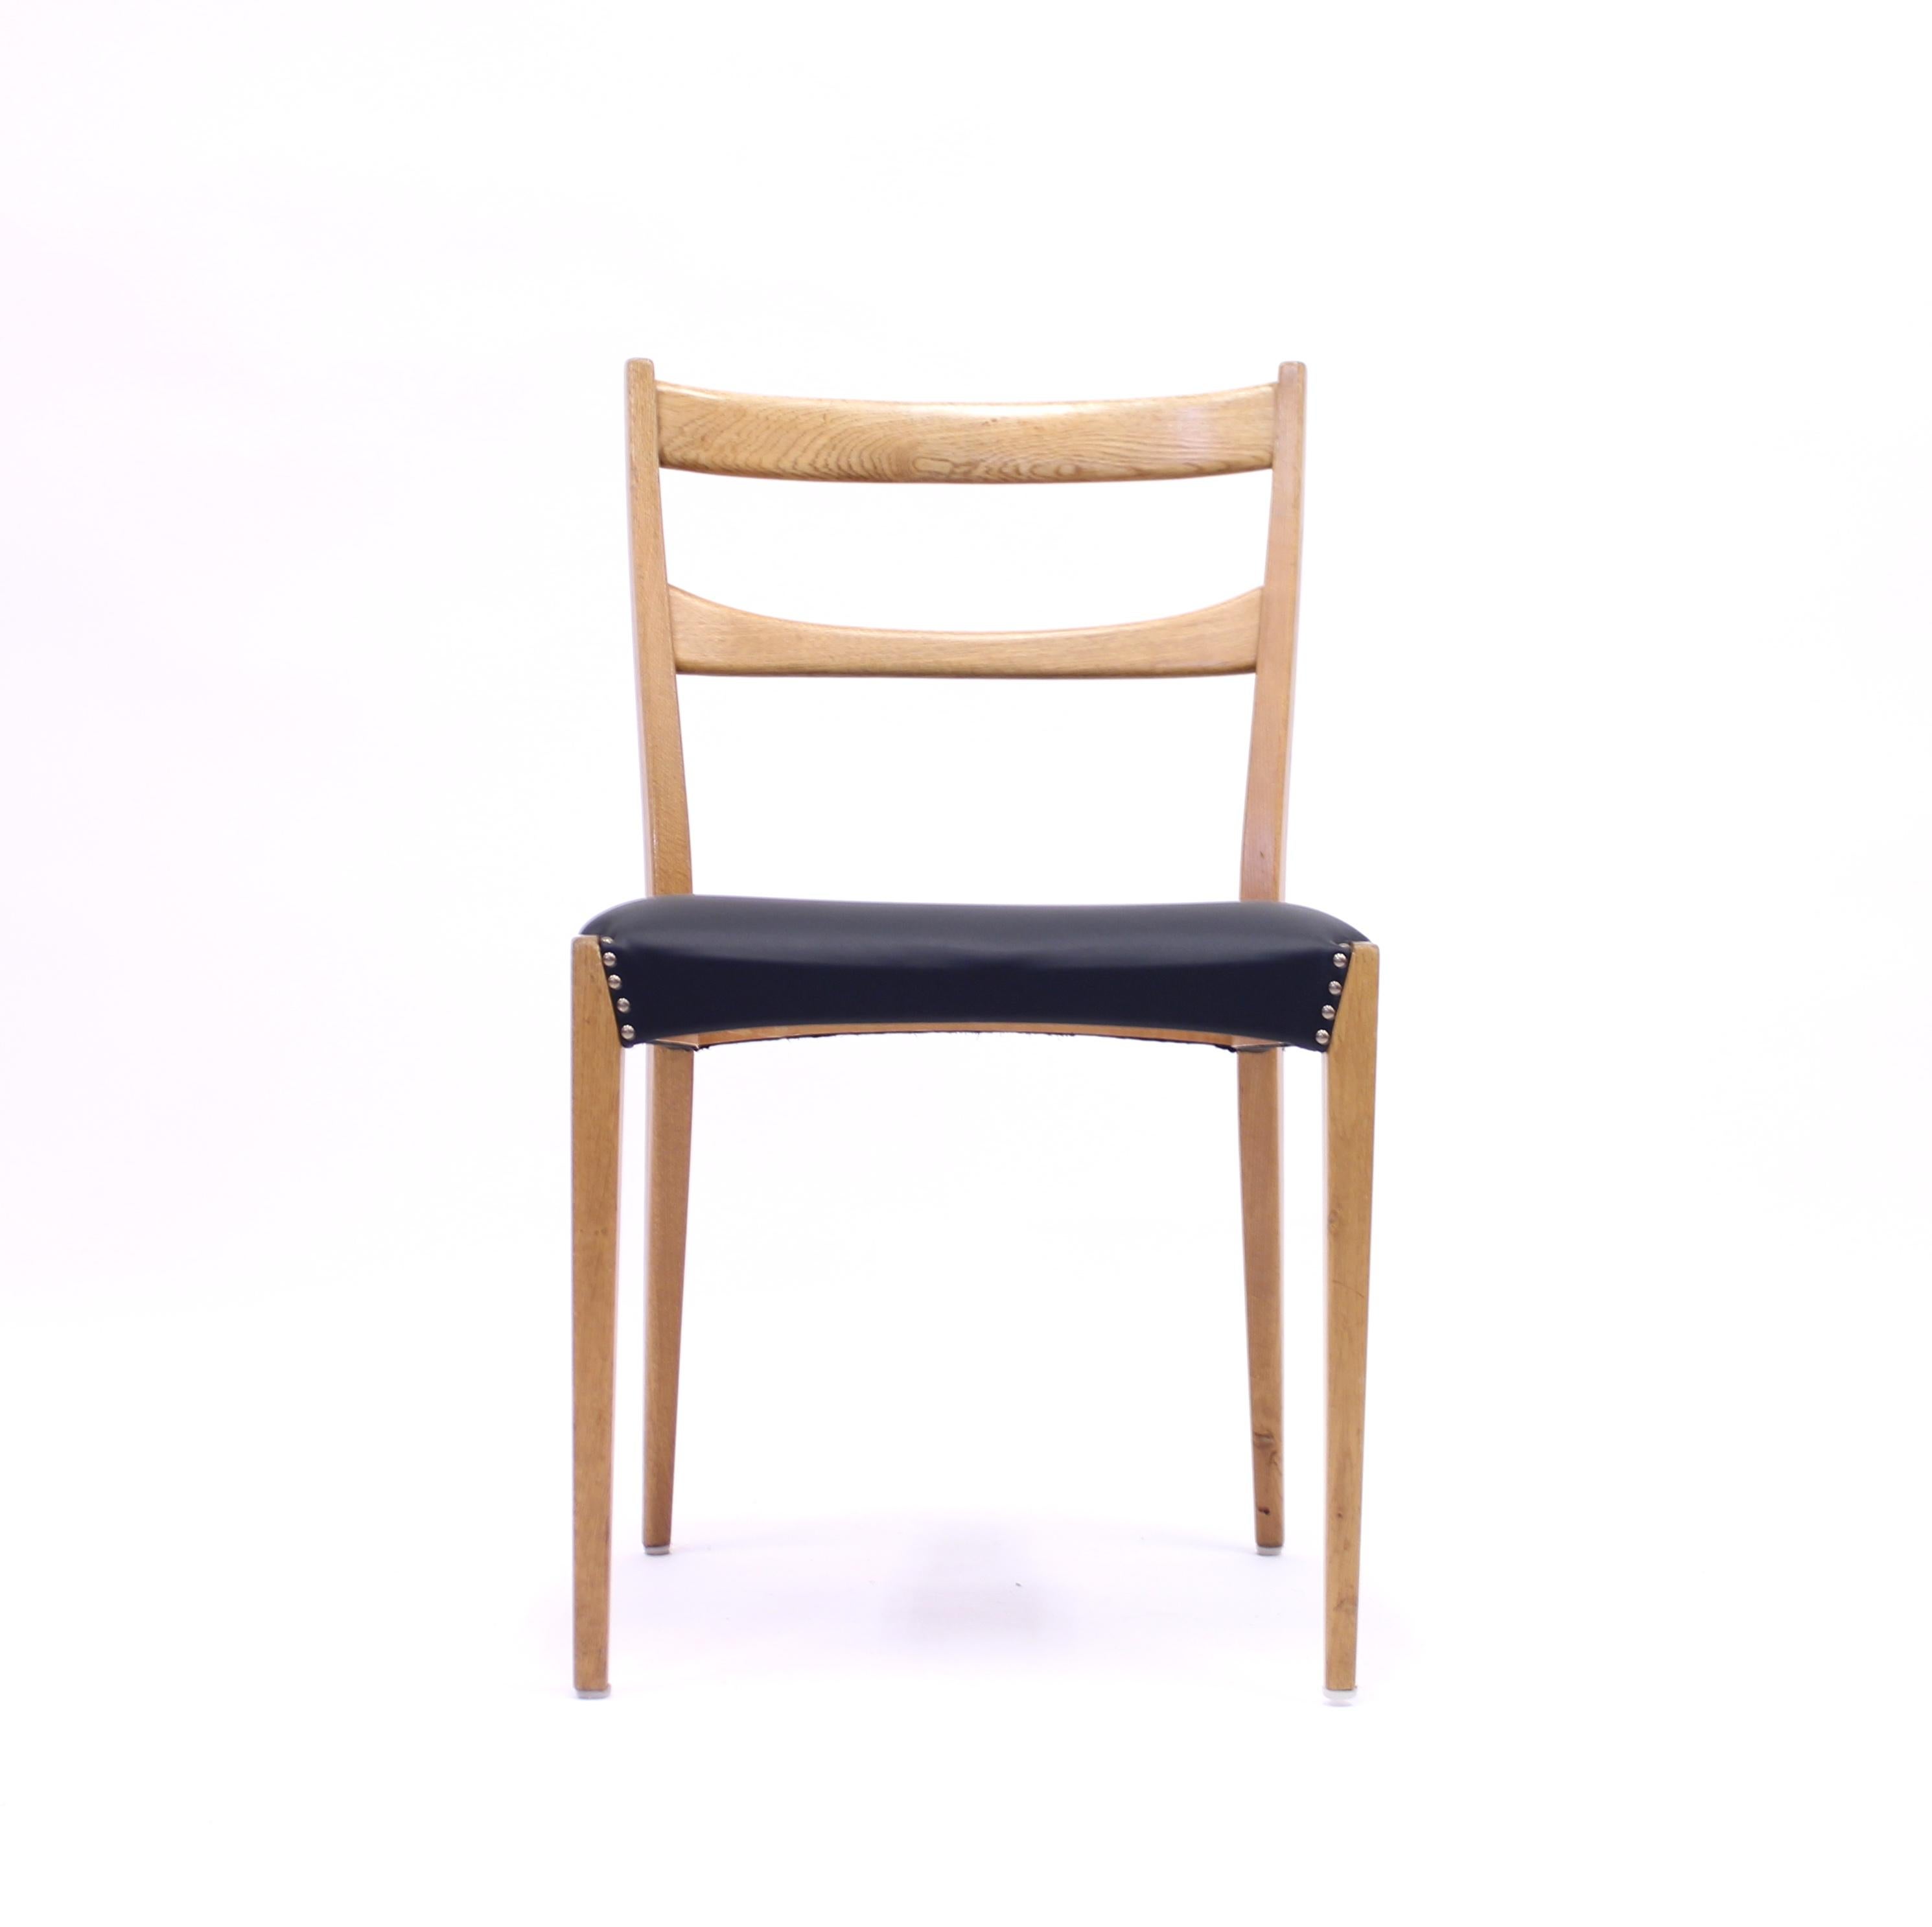 Scandinavian Oak Dining Chairs with Black Leather Seats, 1950s For Sale 4